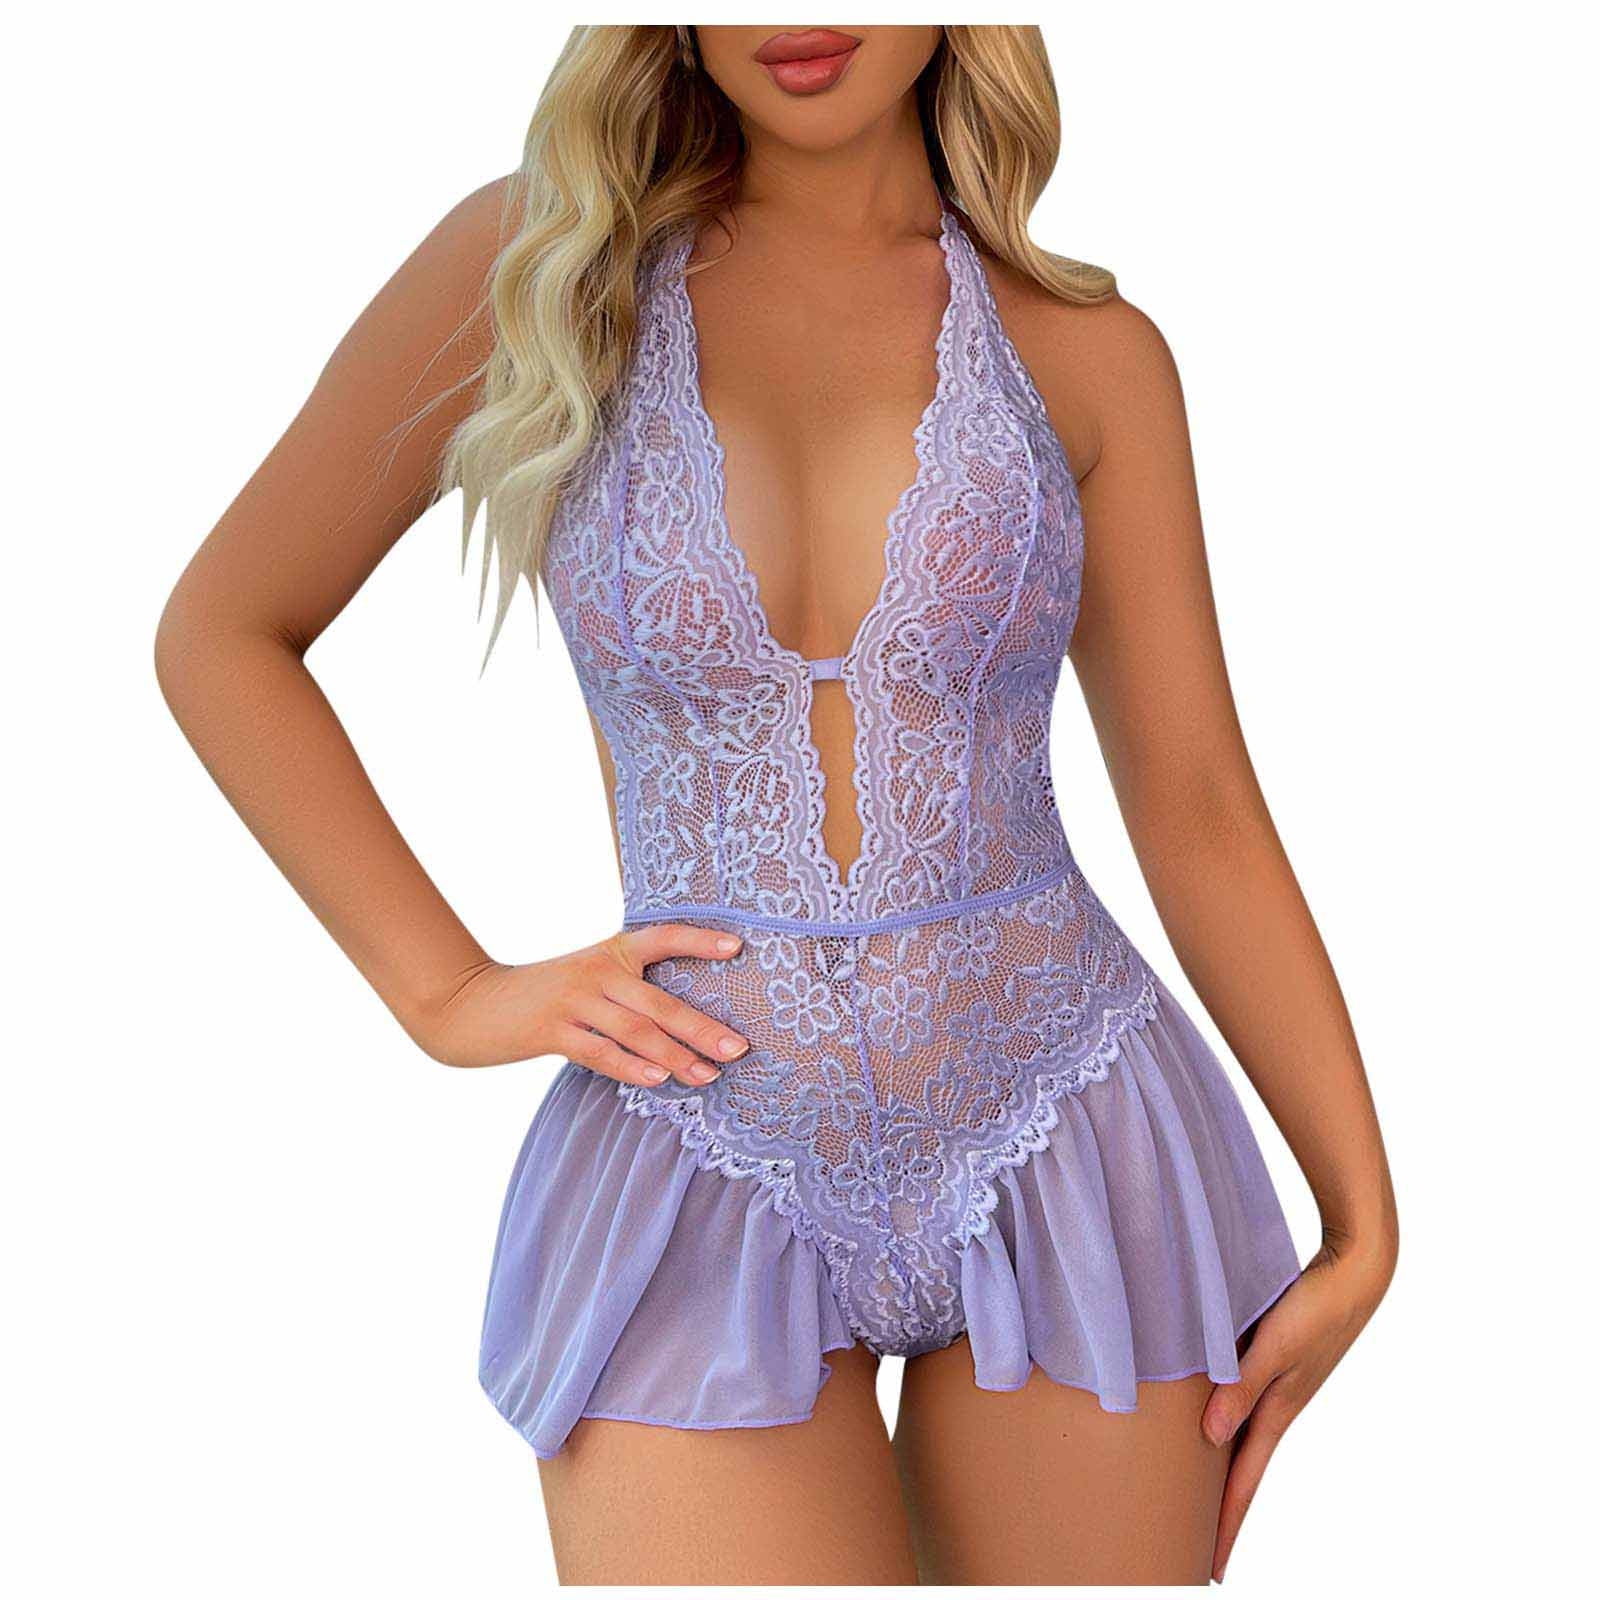 Womens Sexy Lingerie Naughty Sexy See Through Teddy Chemise Nightwear One-Piece Mini Skirt with G-String Teddy Lingerie Babydoll See Through Lingerie Sex Naughty Roleplay Mini Plaid Skirt